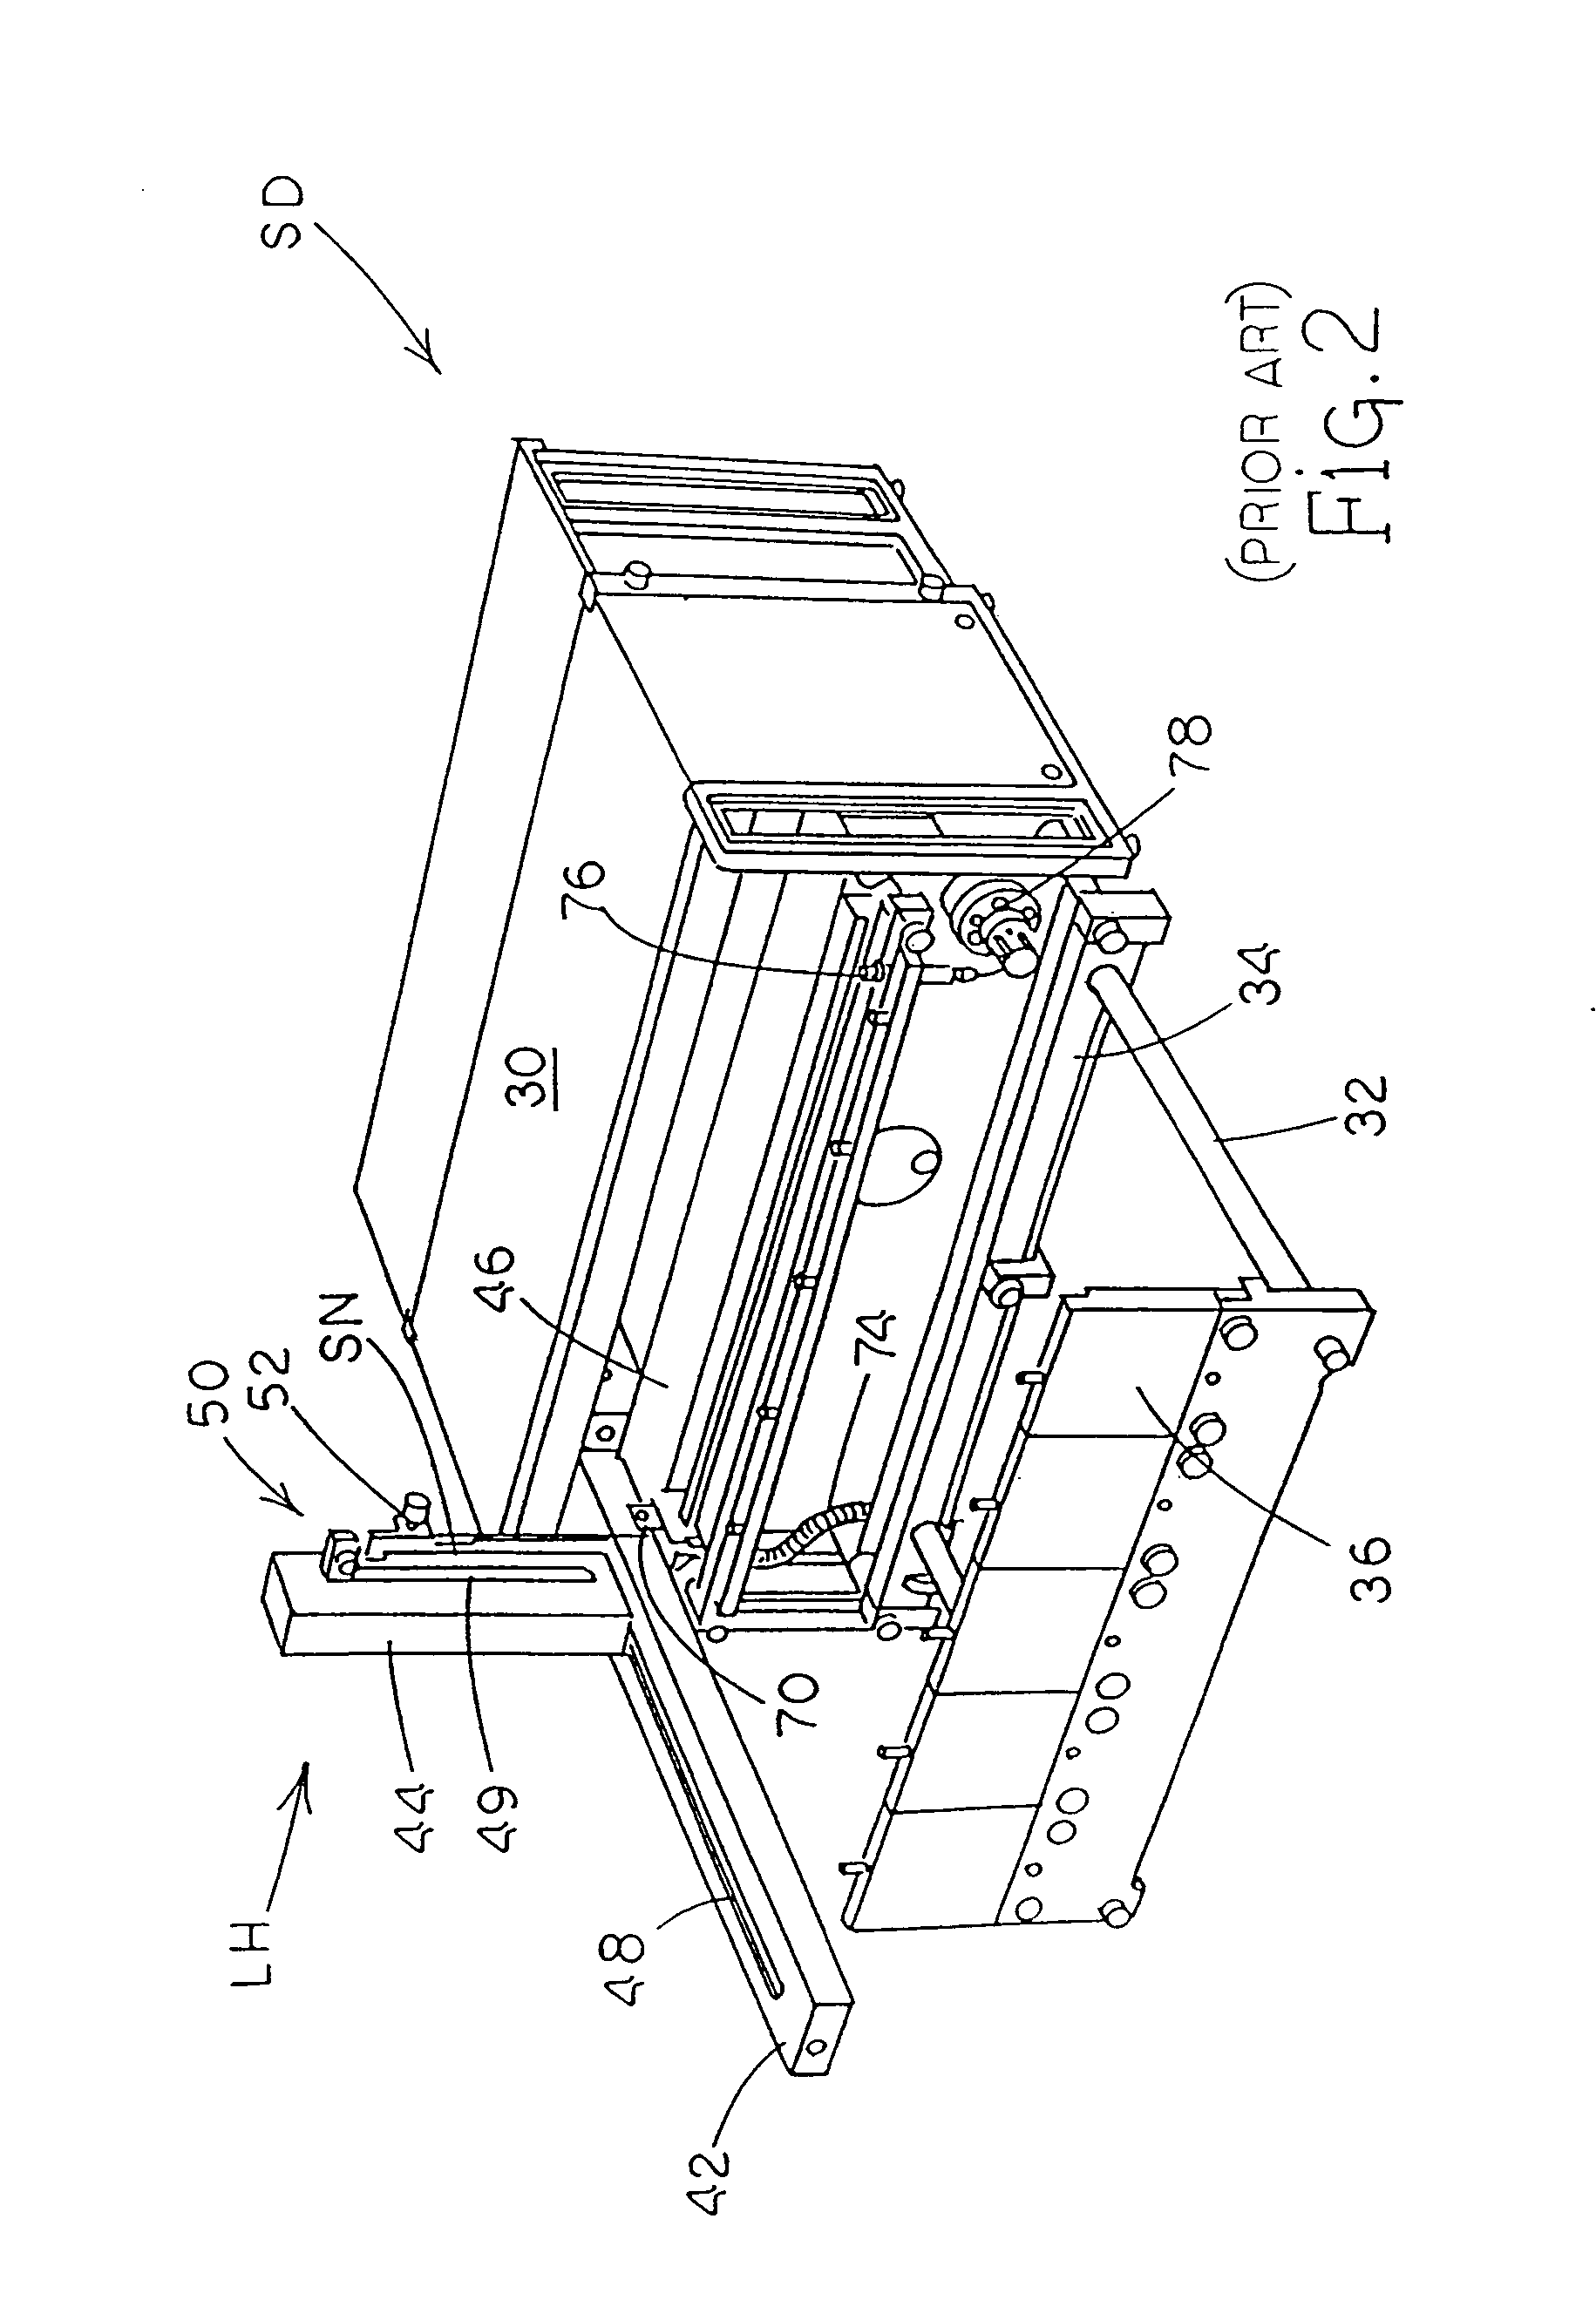 High throughput crystal form screening workstation and method of use